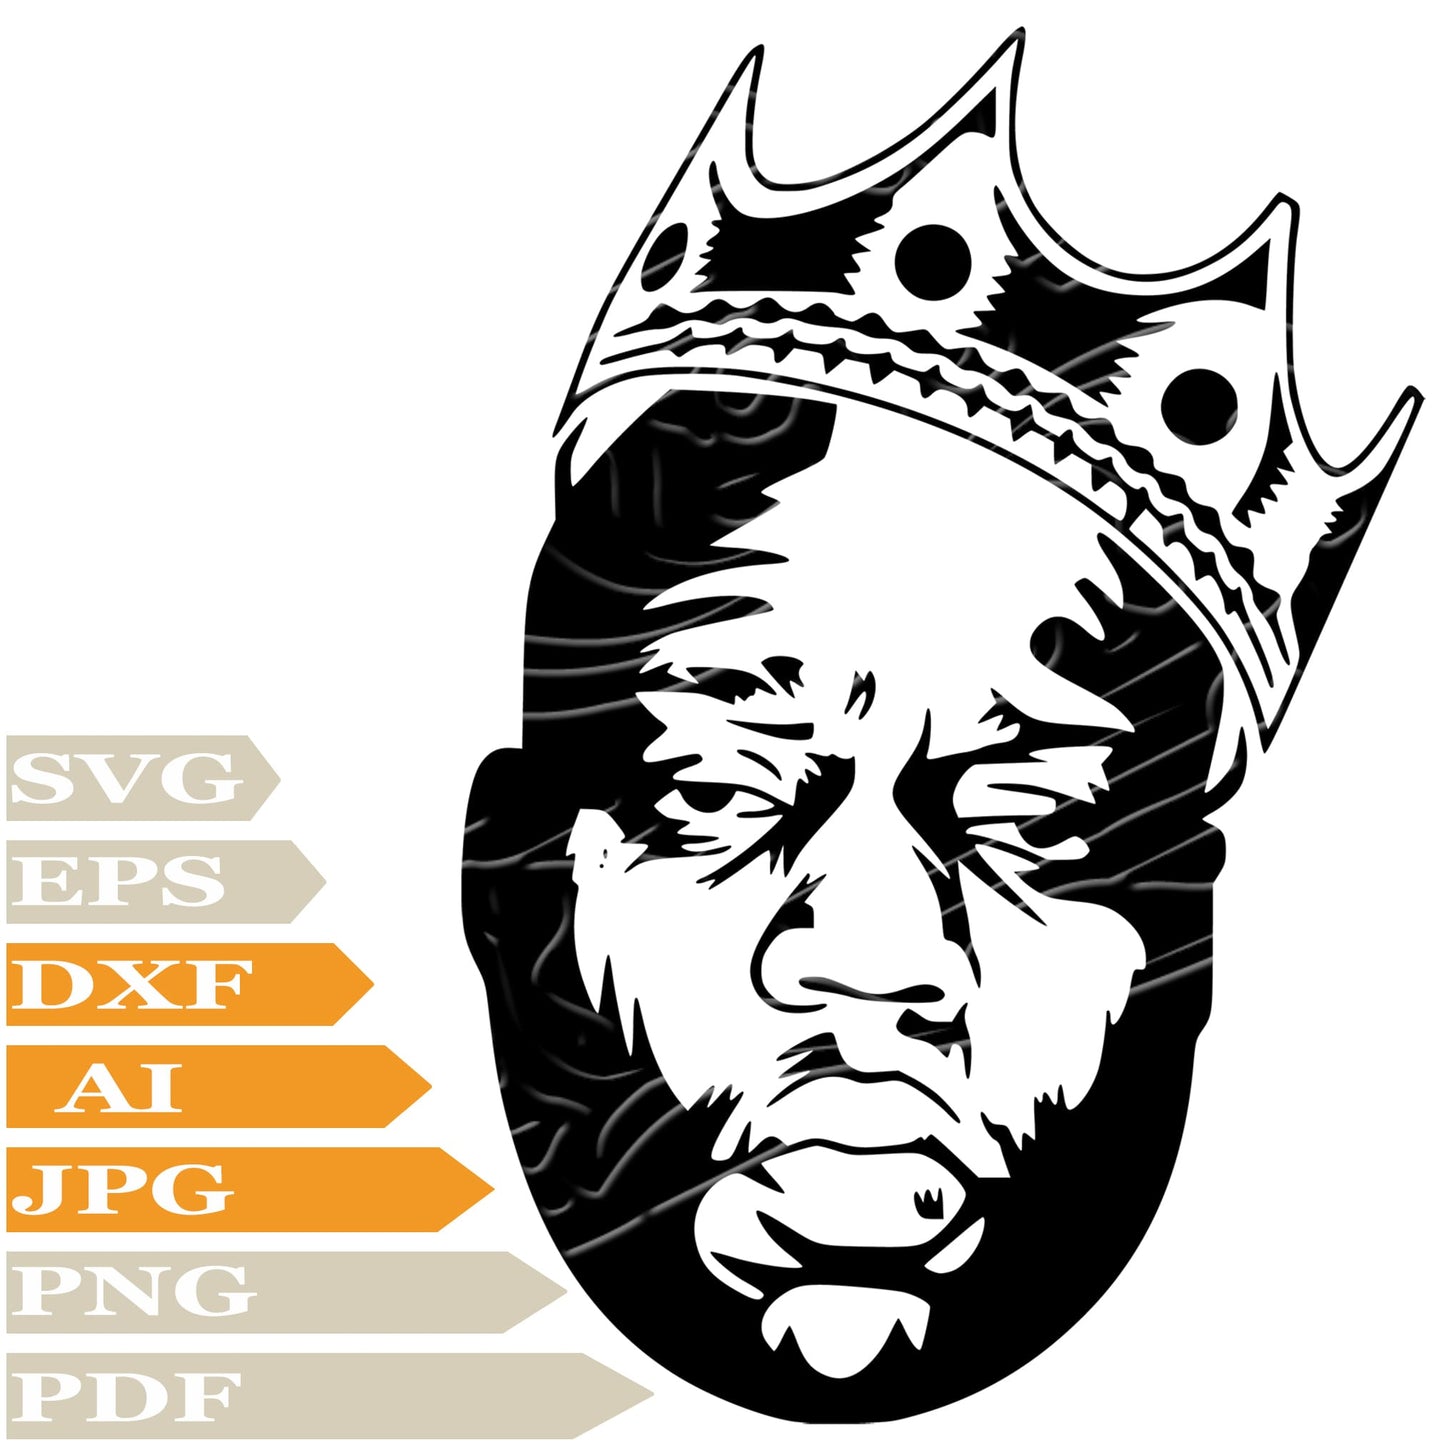 Biggie Smalls,  The Notorious B.I.G  Svg File, Image Cut, Png, For Tattoo, Silhouette, Digital Vector Download, Cut File, Clipart, For Cricut